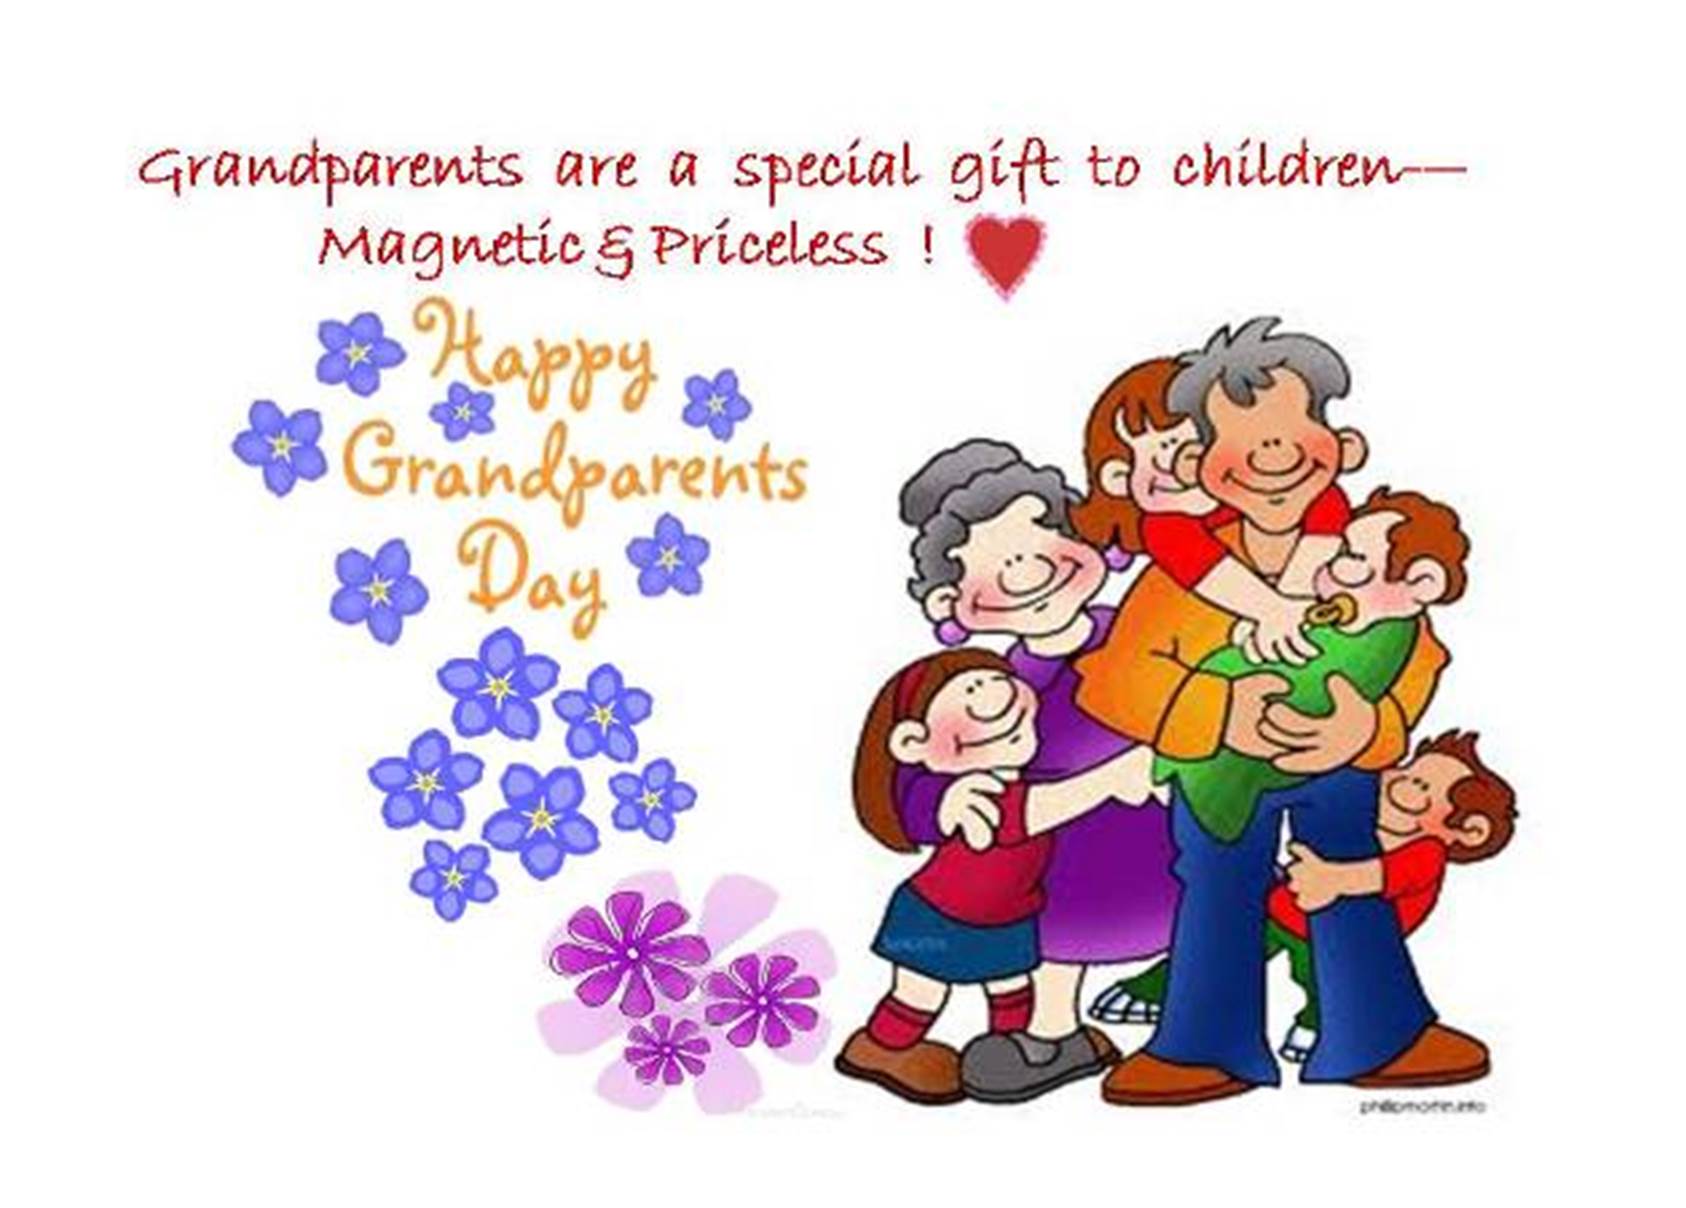 Do your grandparents. For grandparents. Grandparents Day all over the World. Poem for grandparents.